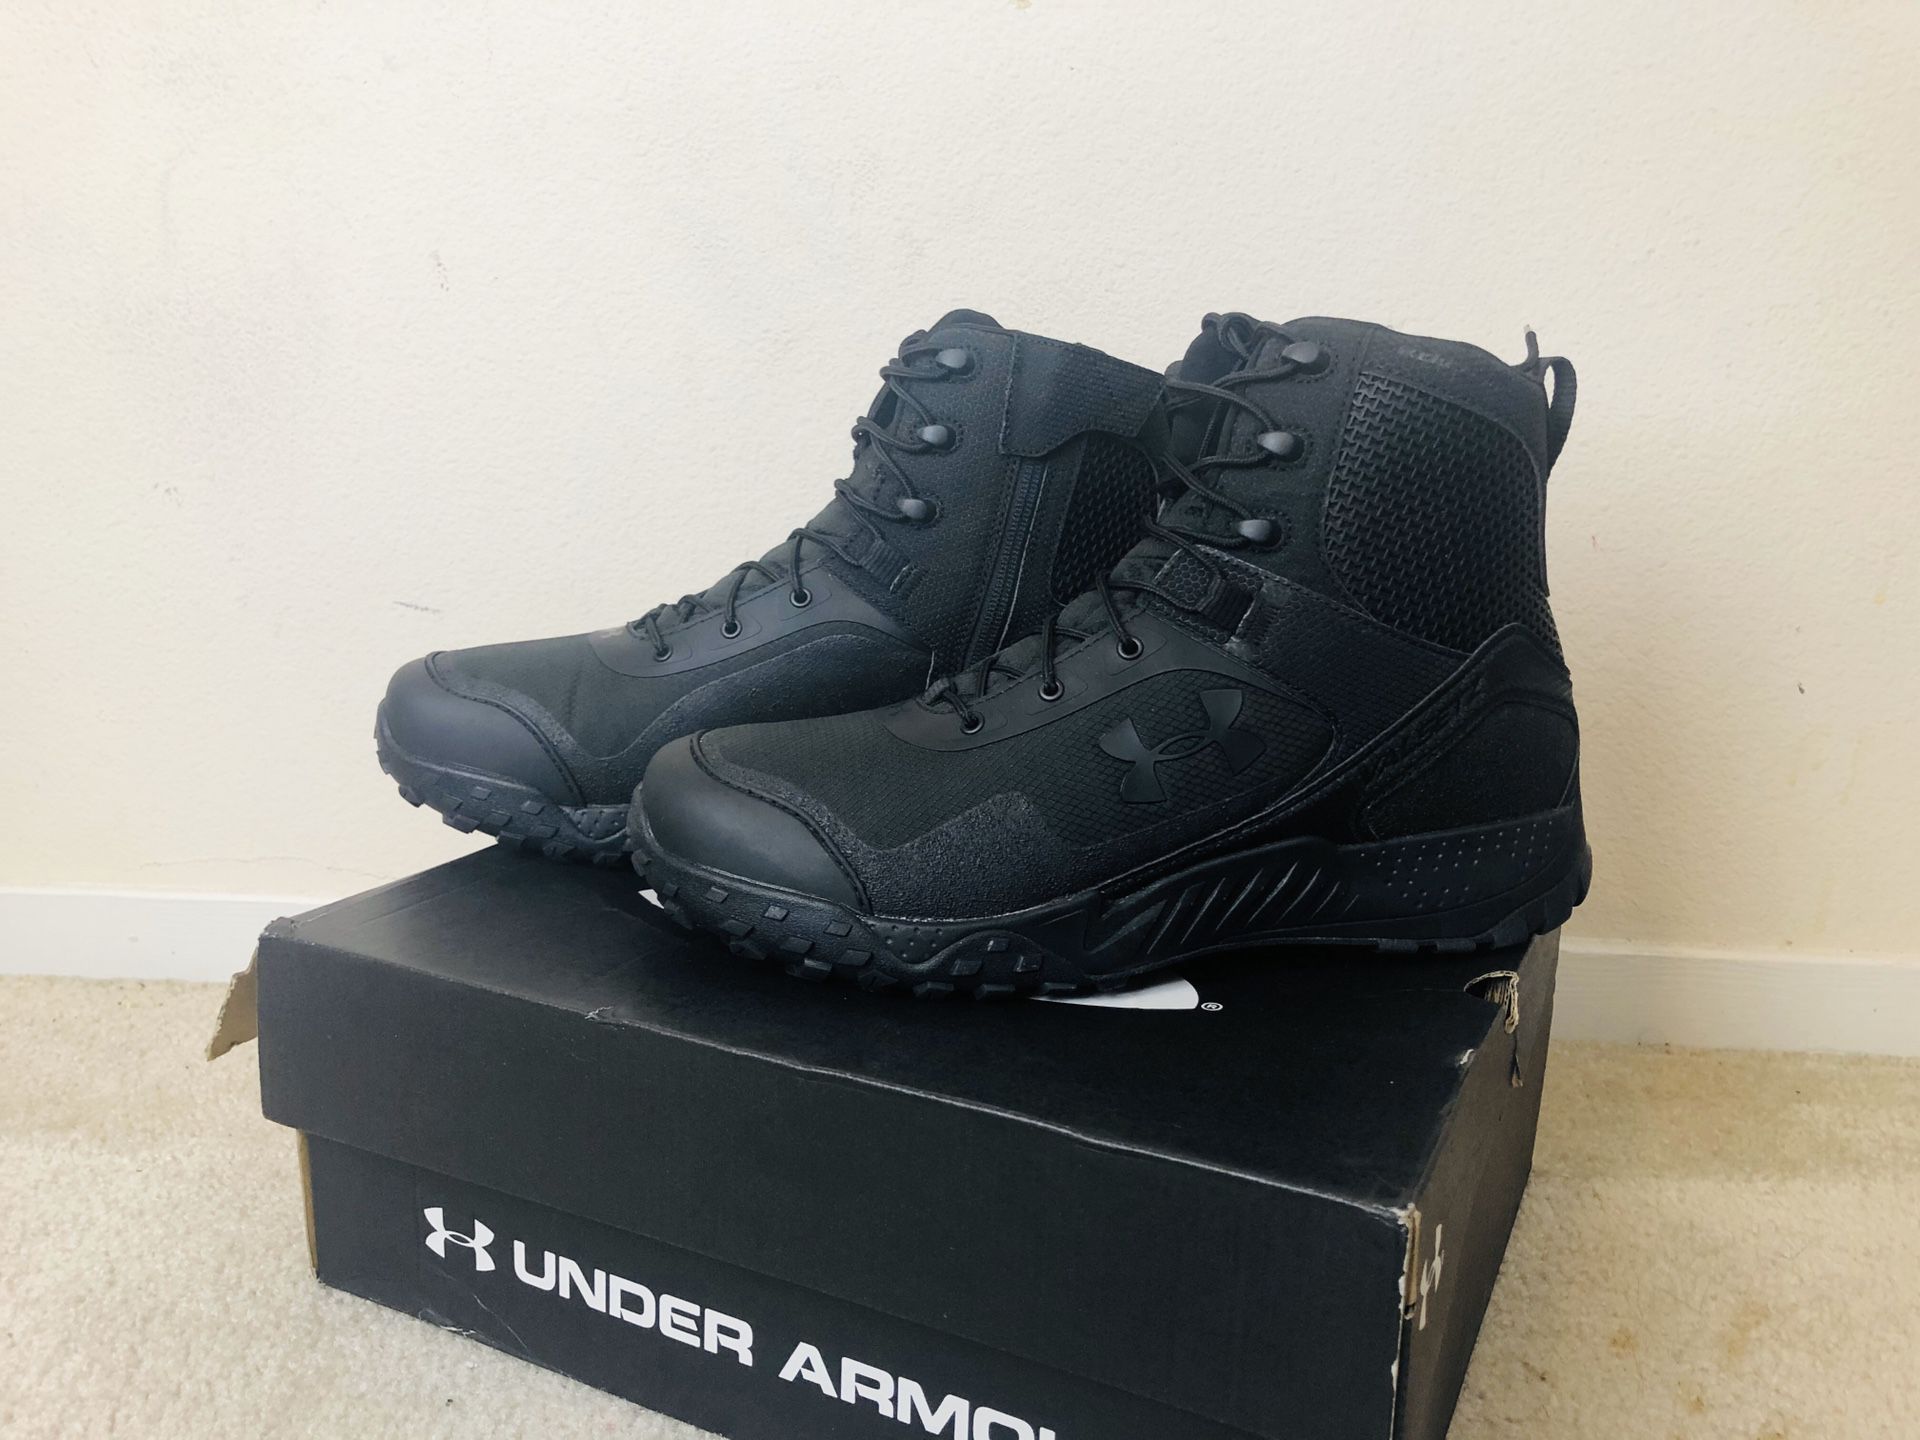 Under Armour Work Boots size 11